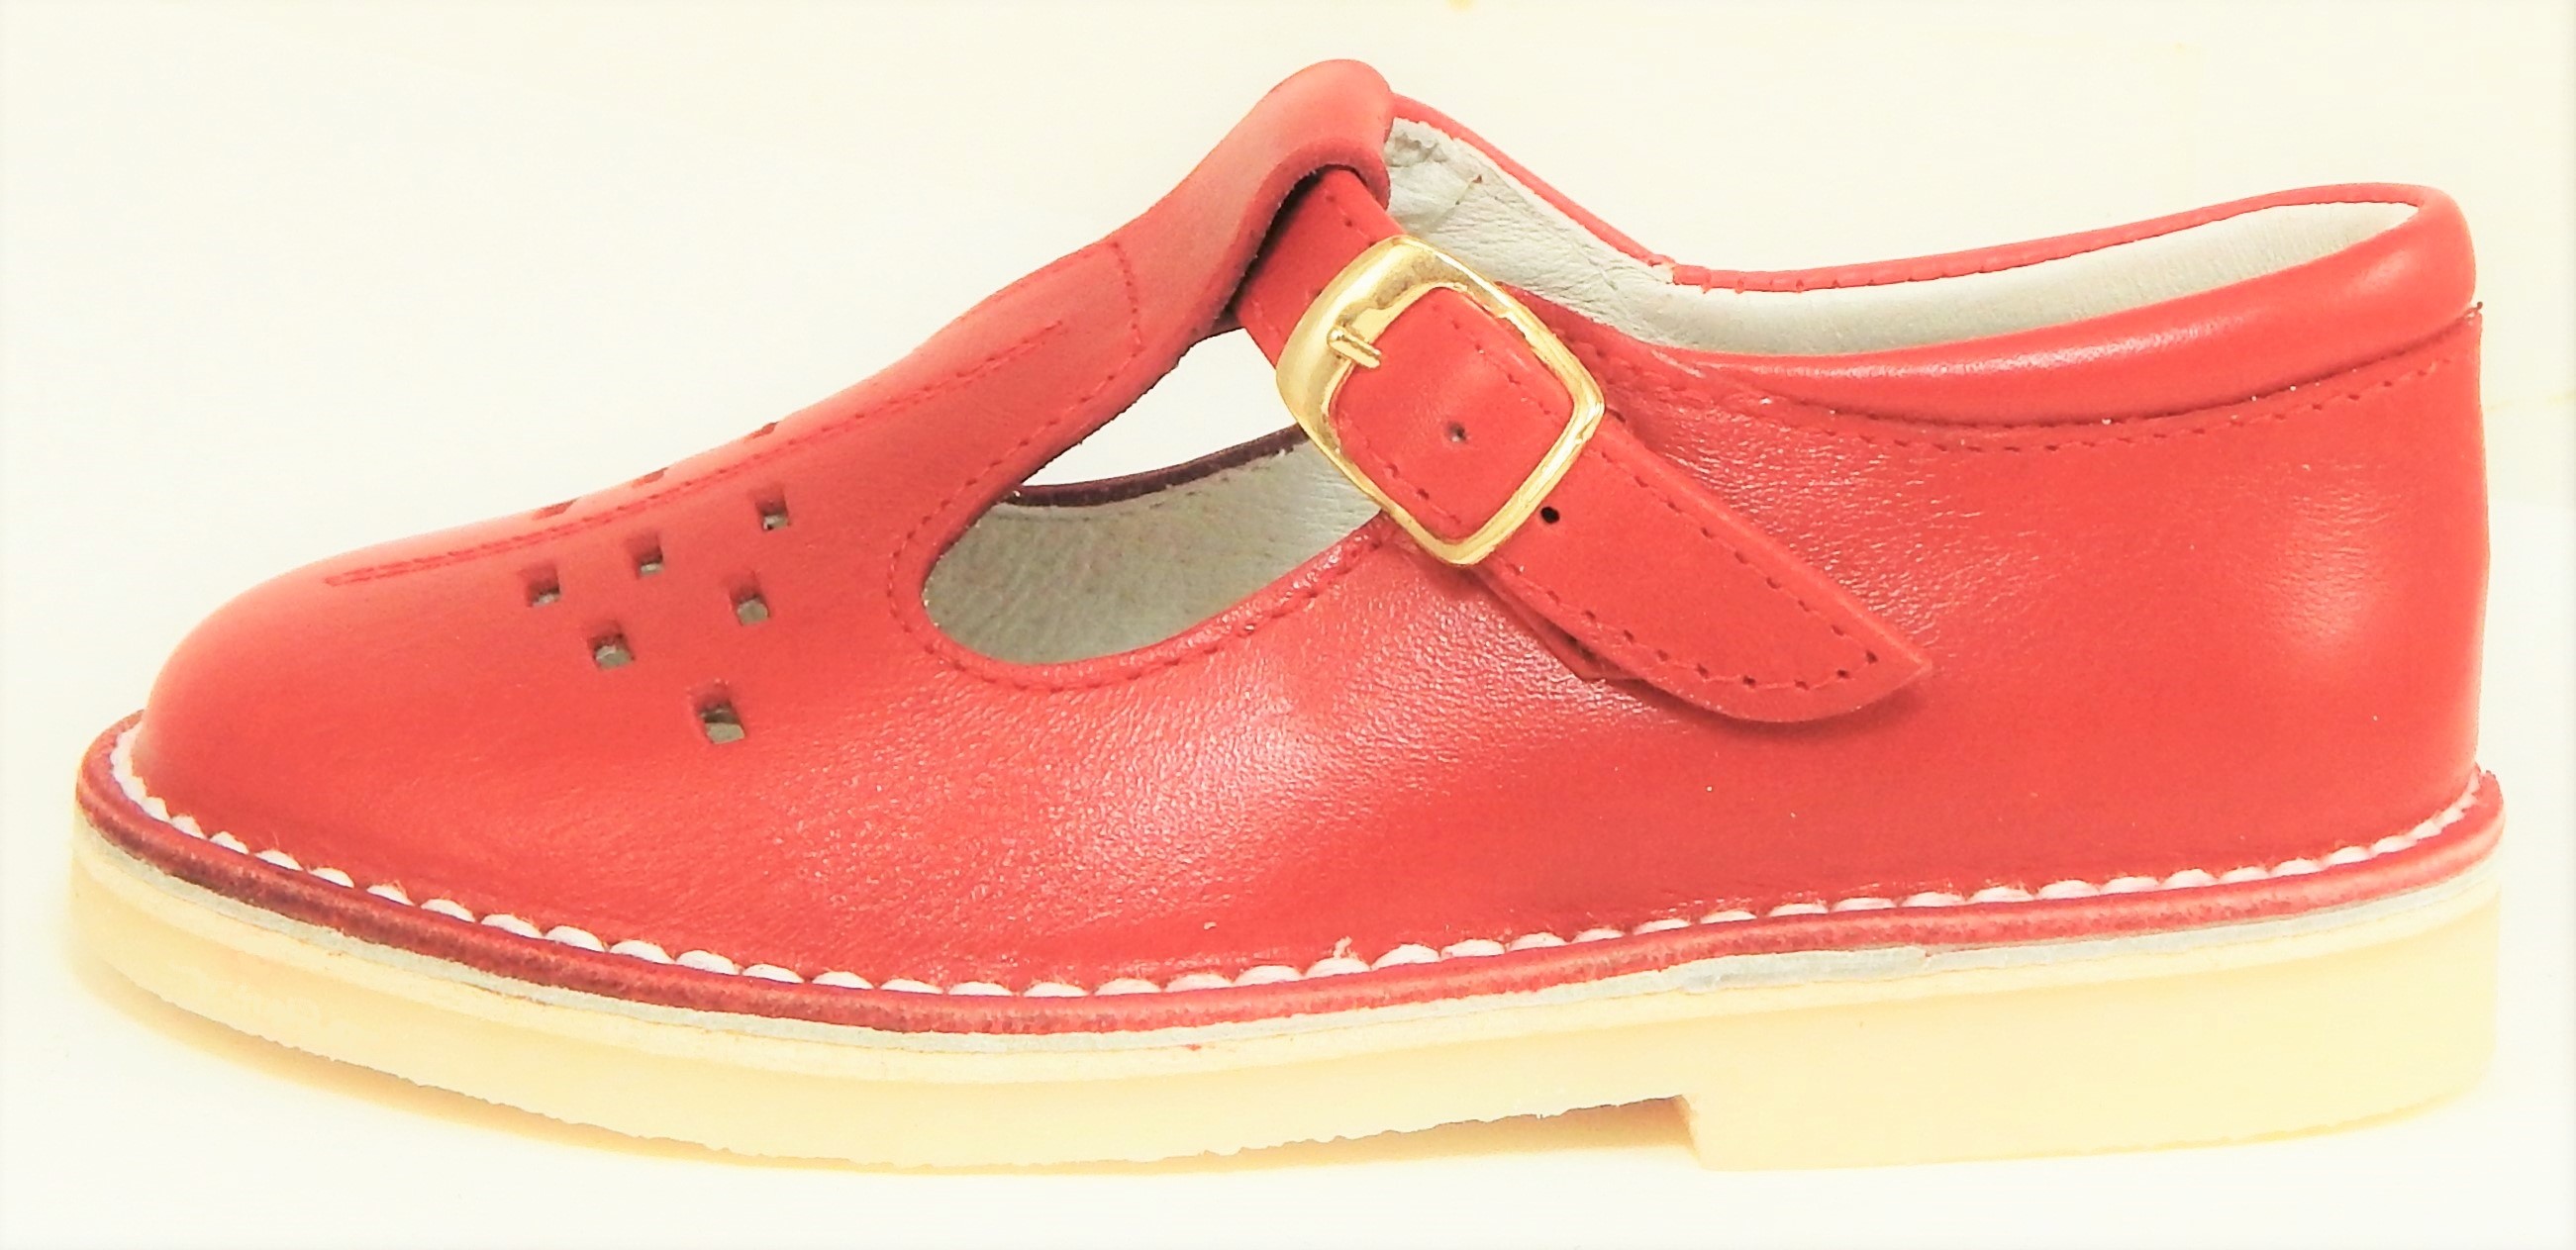 A-1154 P - Red Leather T-Straps